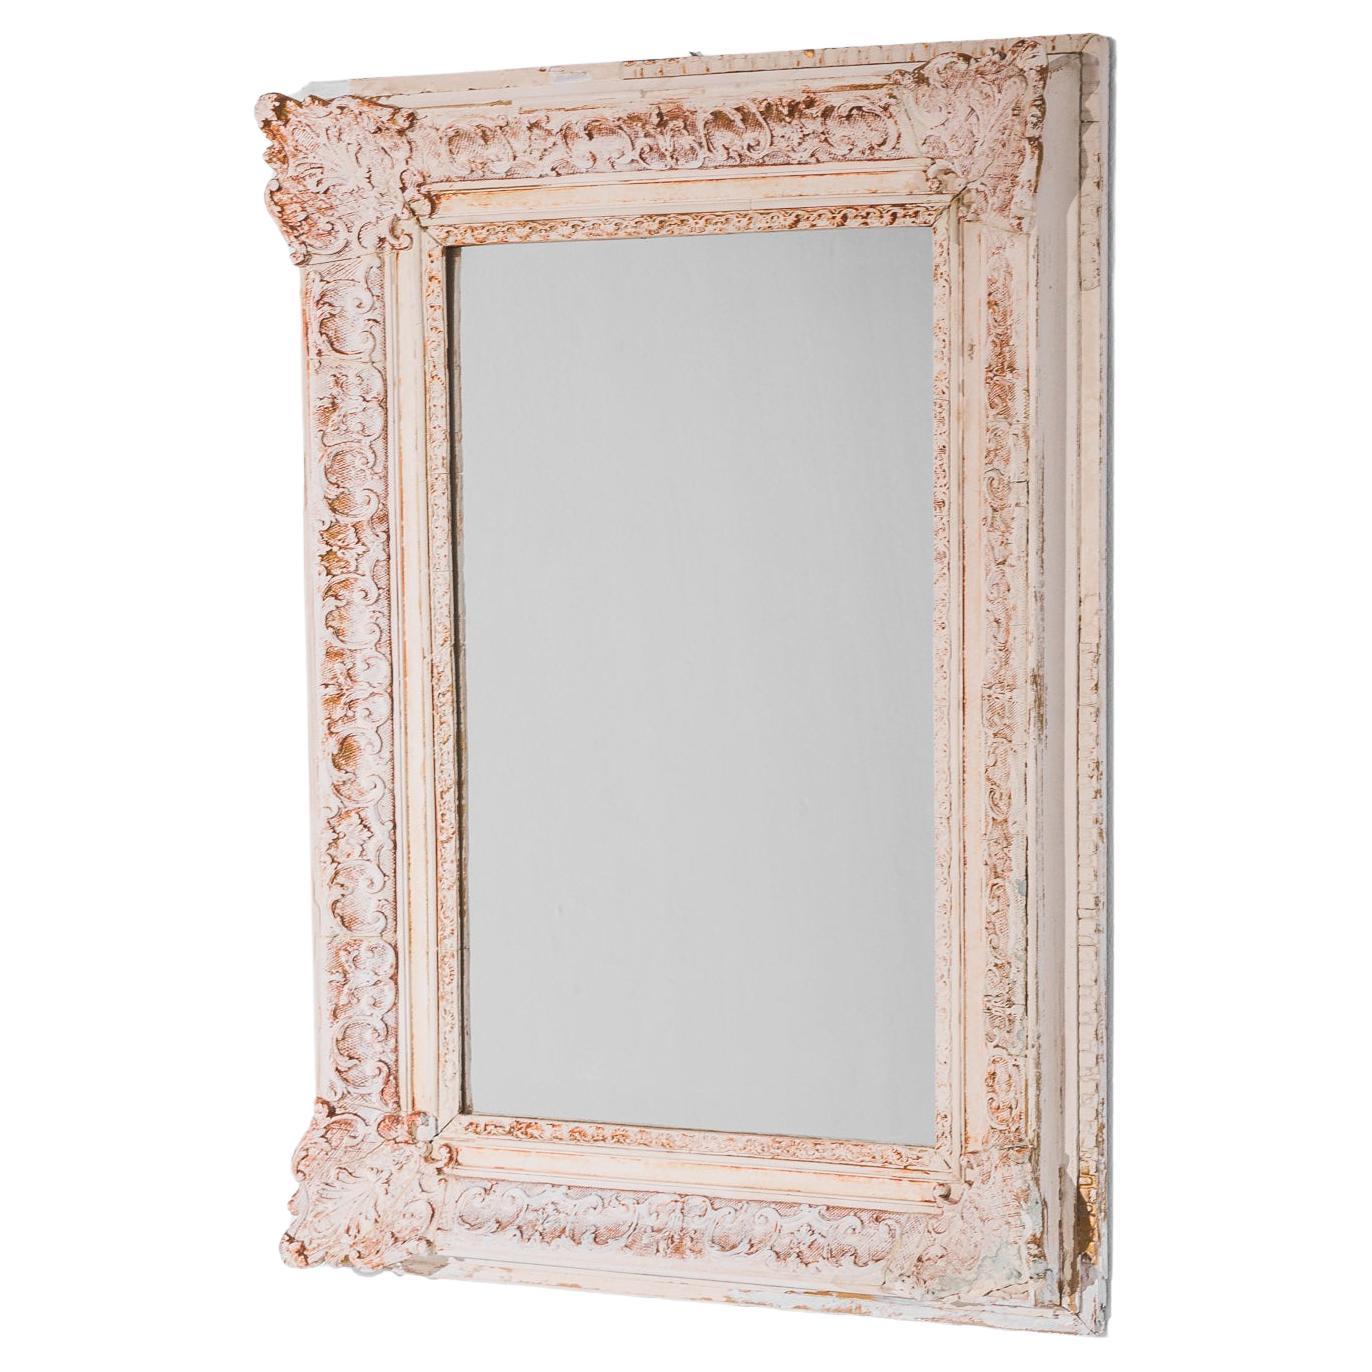 1880s French White Patinated Rococo Mirror For Sale